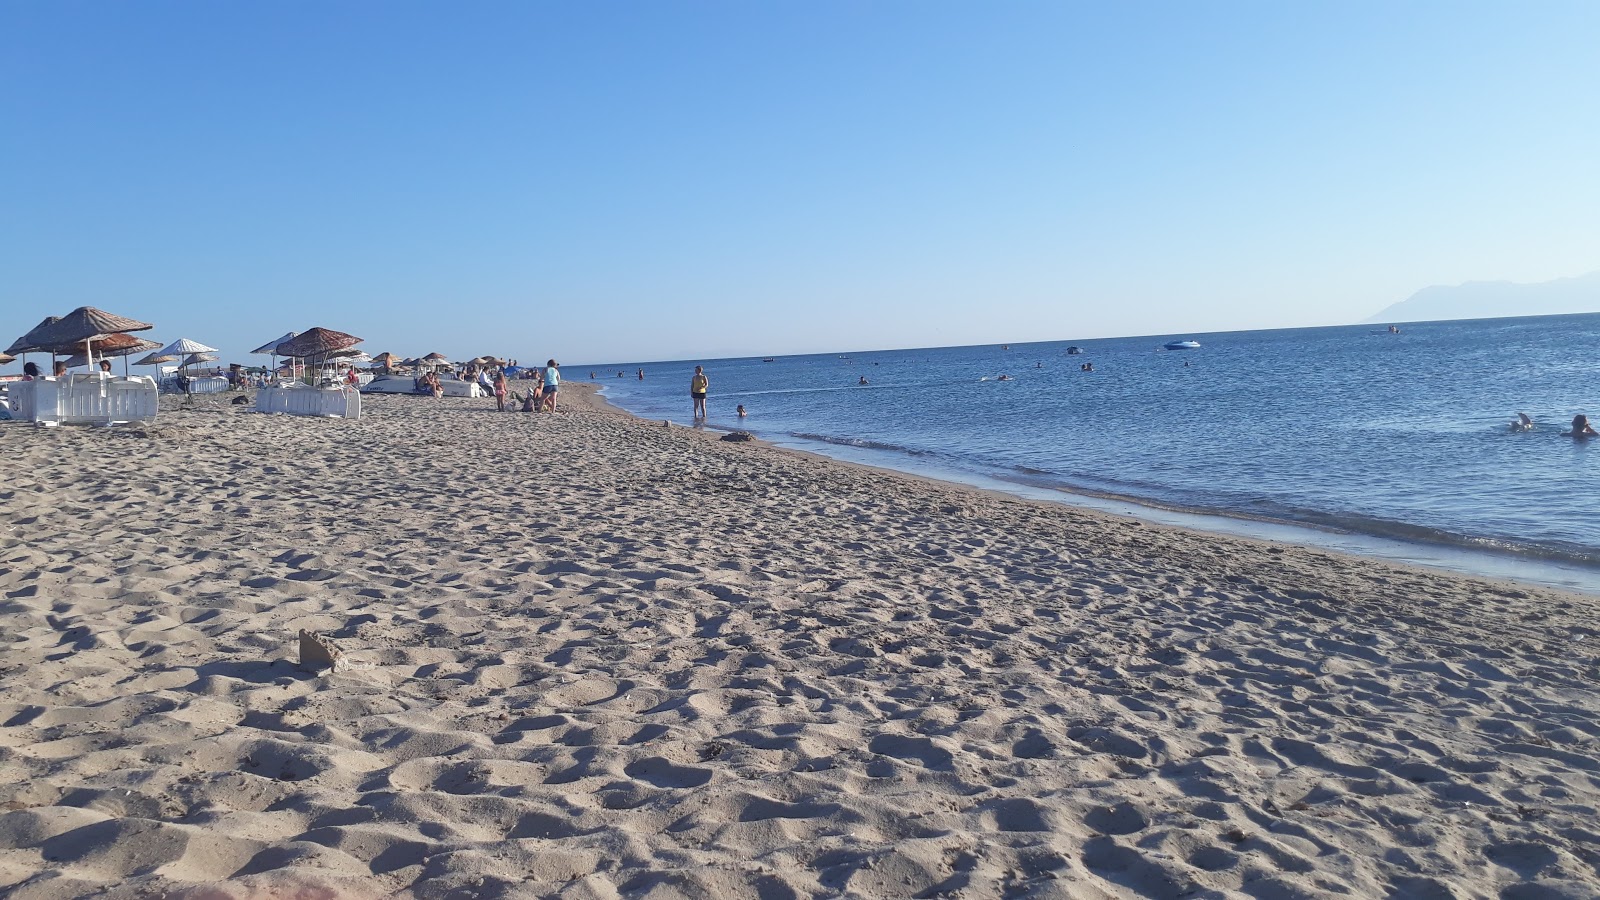 Photo of Altinkum beach - recommended for family travellers with kids